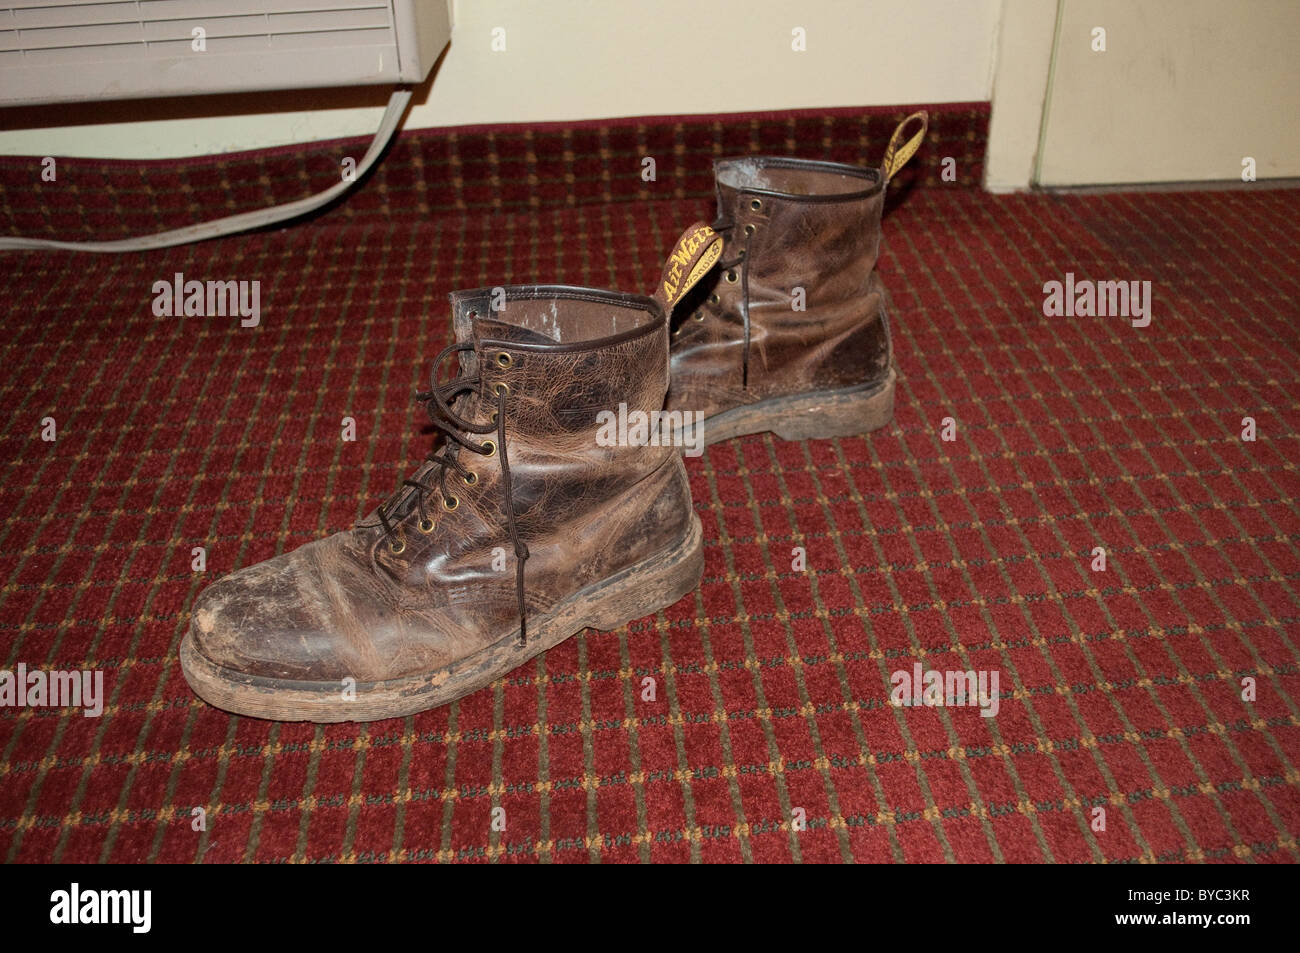 Worn leather work boots on the floor of a nasty roach motel. Stock Photo